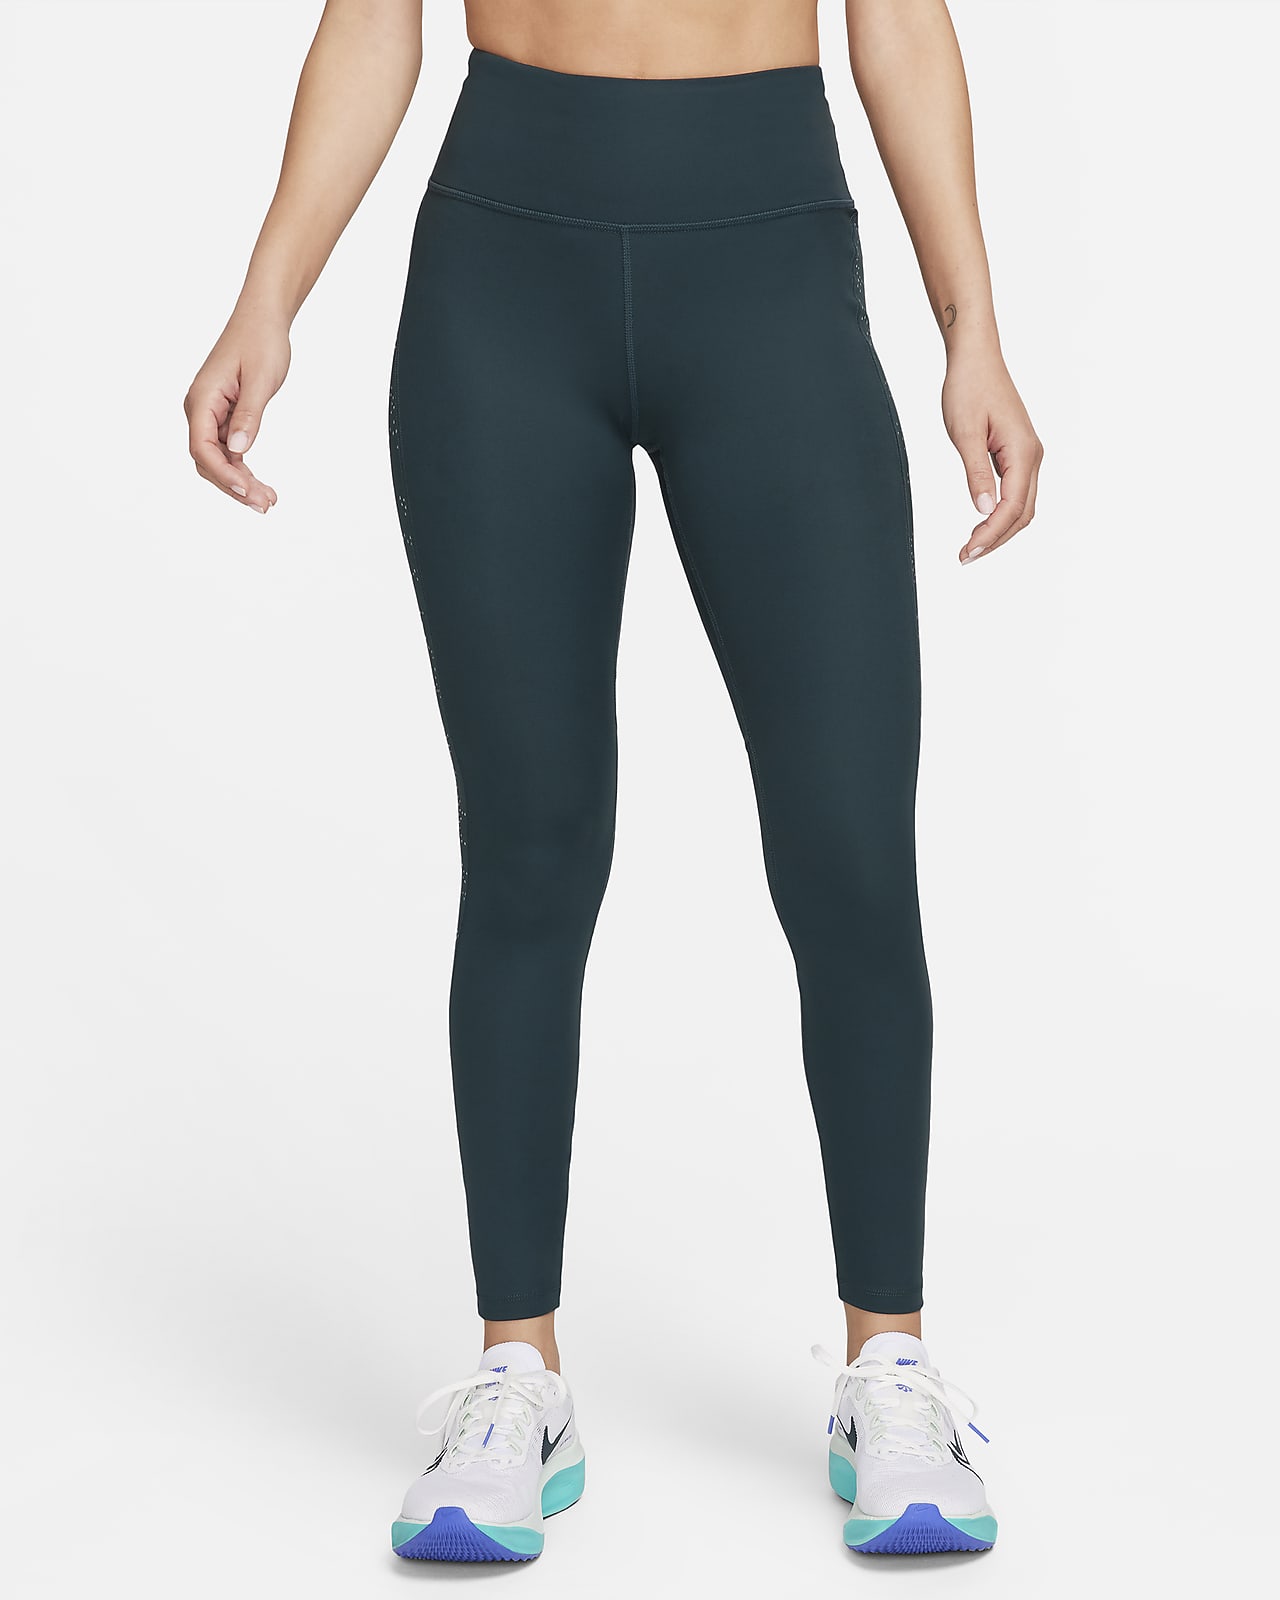 https://static.nike.com/a/images/t_PDP_1280_v1/f_auto,q_auto:eco/80f0ca71-62d5-418e-bd45-6f156a88c59b/fast-mid-rise-7-8-printed-leggings-with-pockets-mkZPBc.png